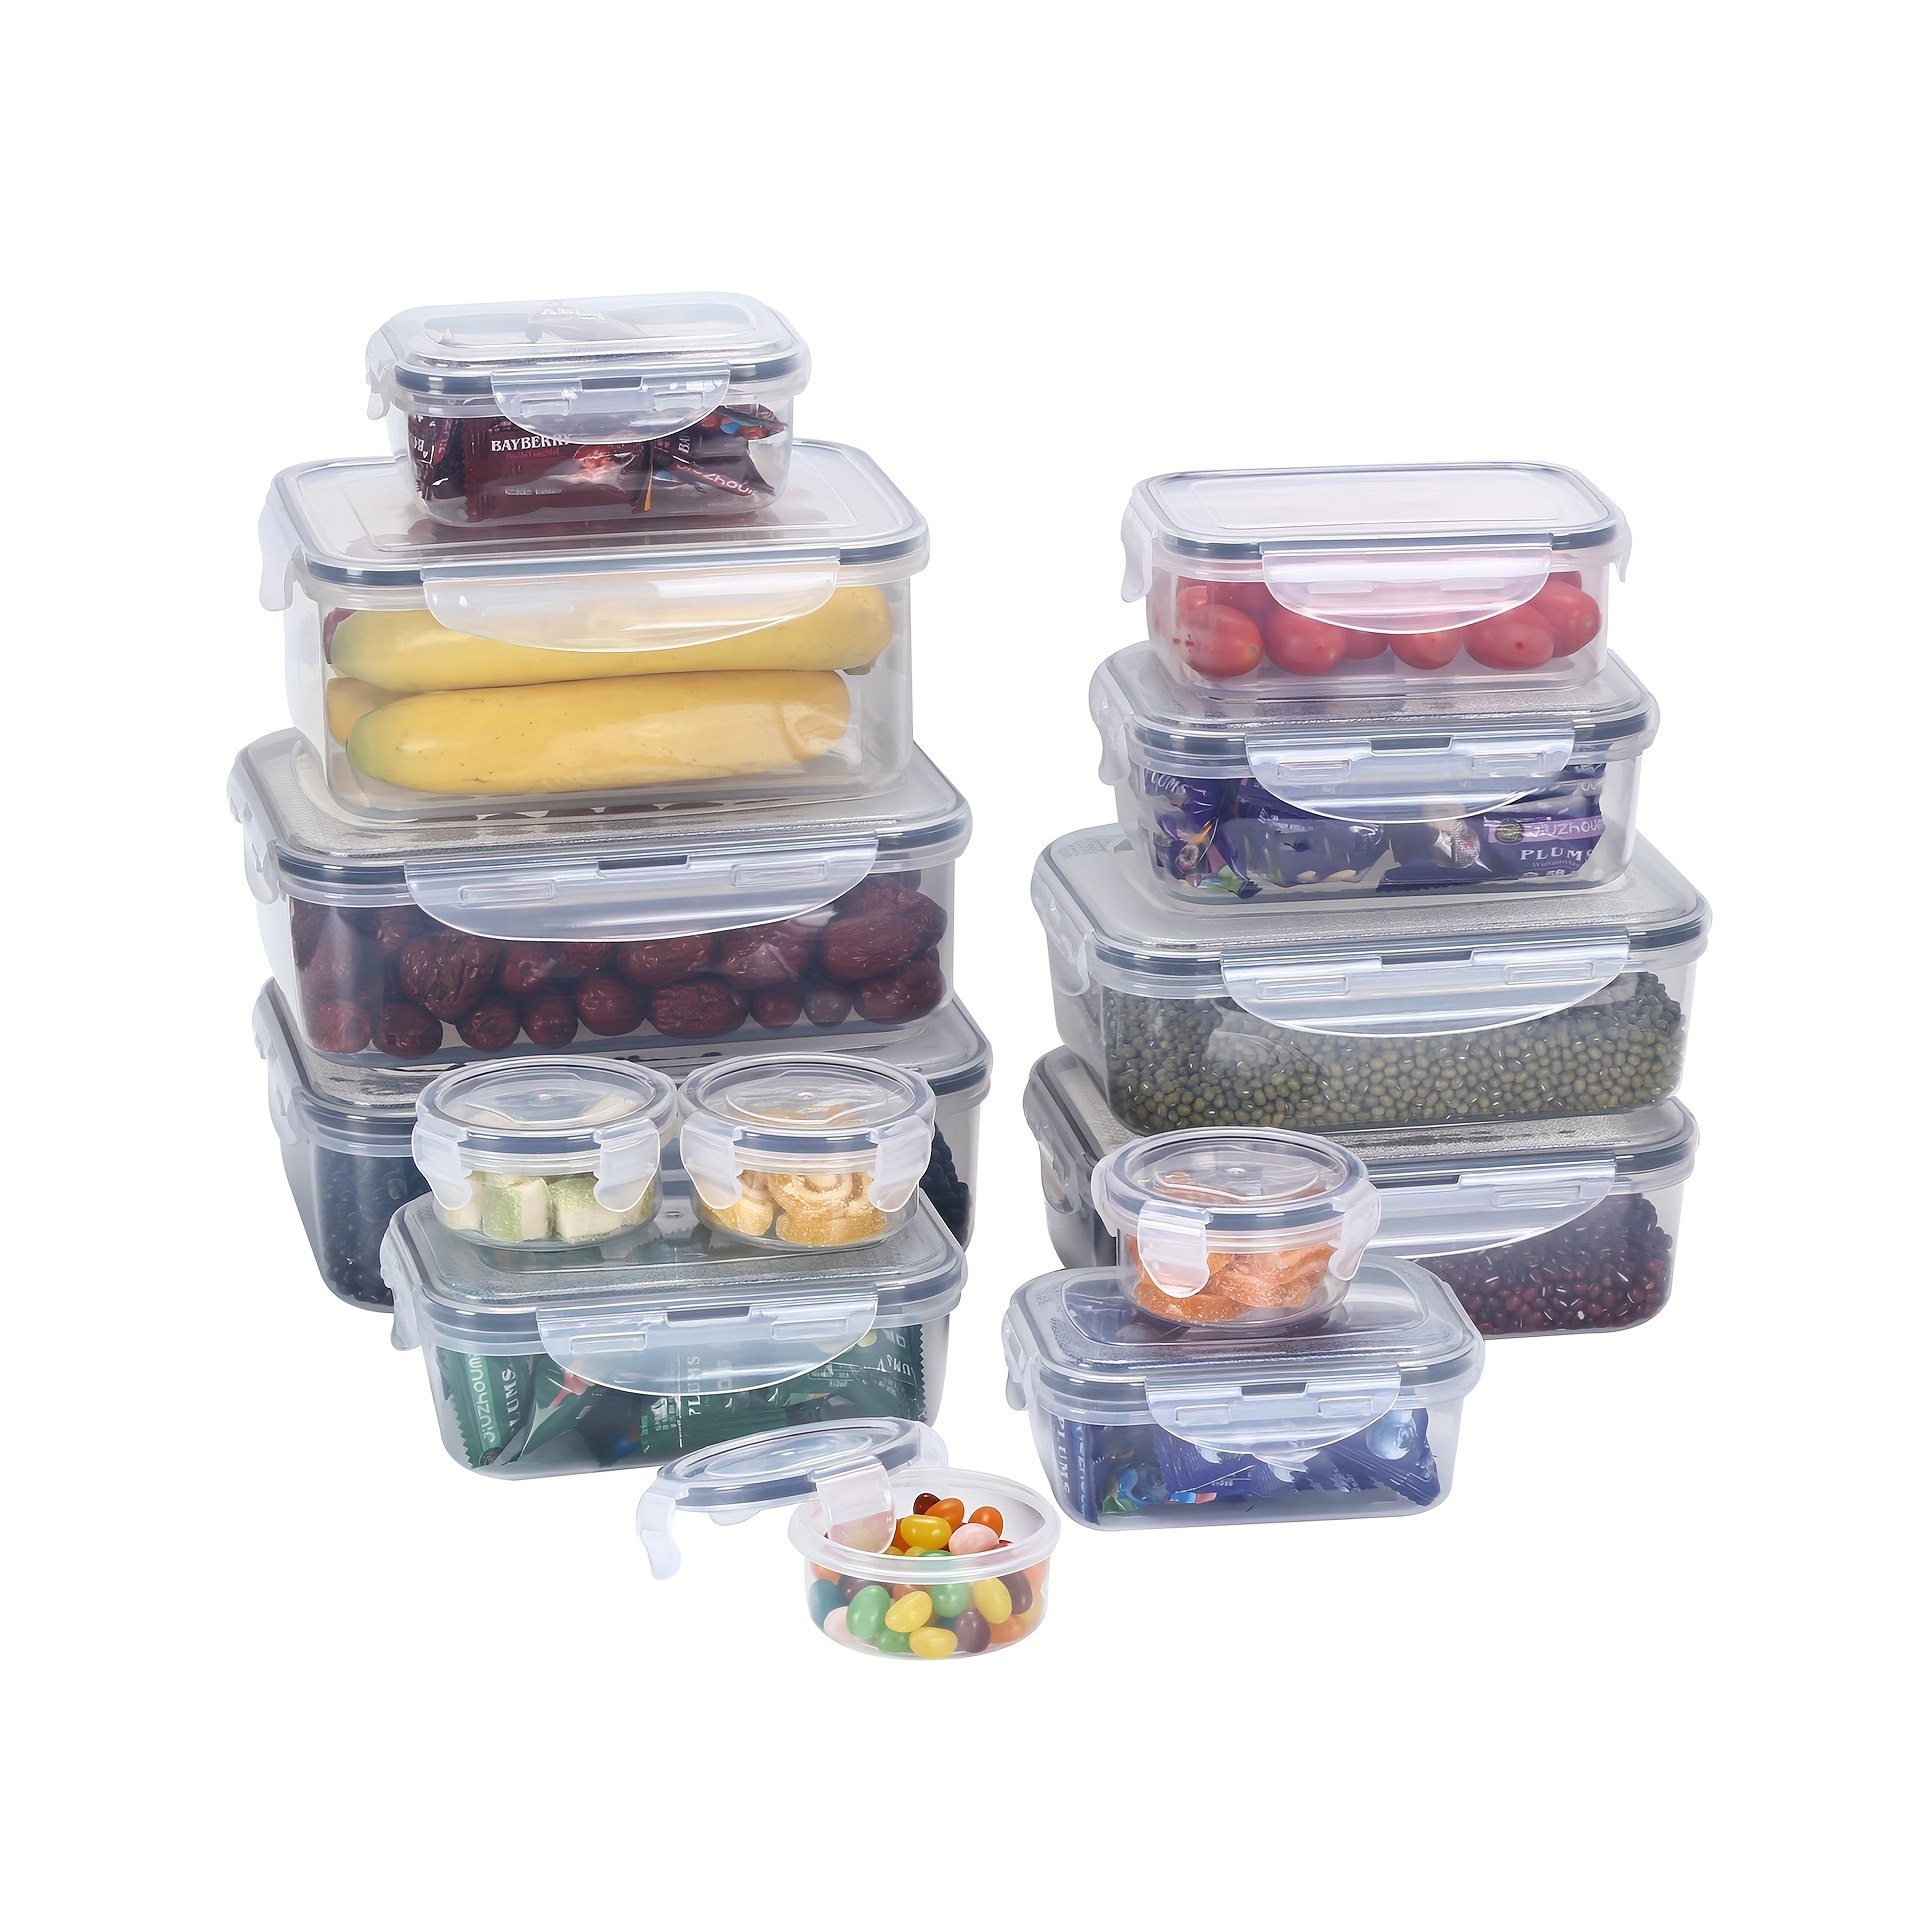 Rubbermaid 28 Piece Storage Set as Low as $13.99 - Ships Free for